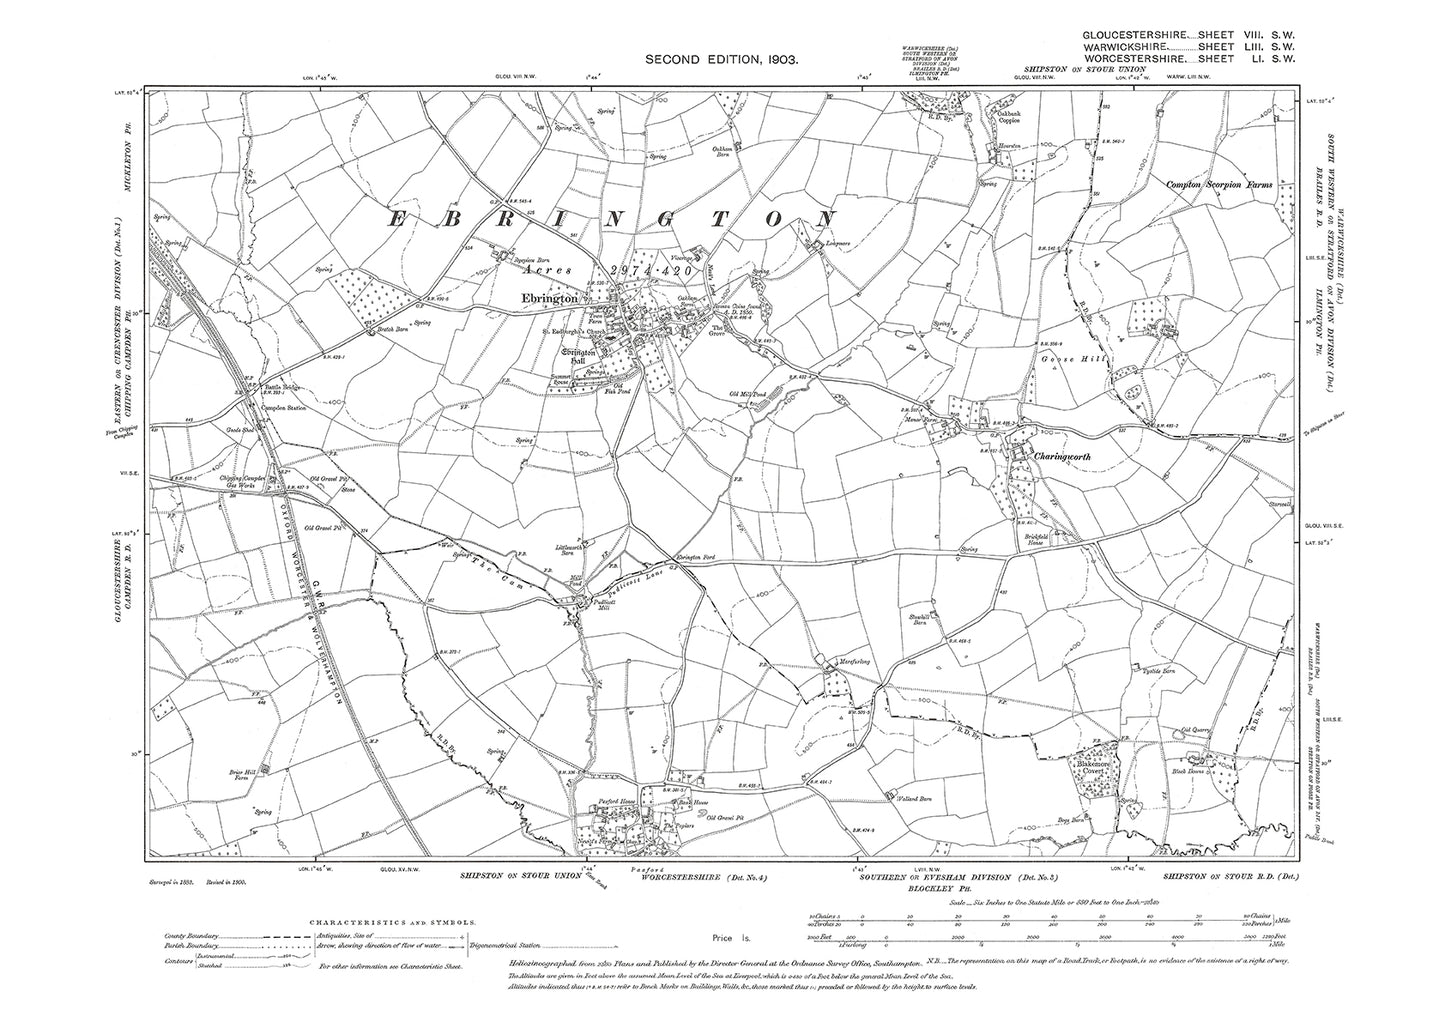 Old OS map dated 1903, showing Ebrington in Gloucestershire - 8SW